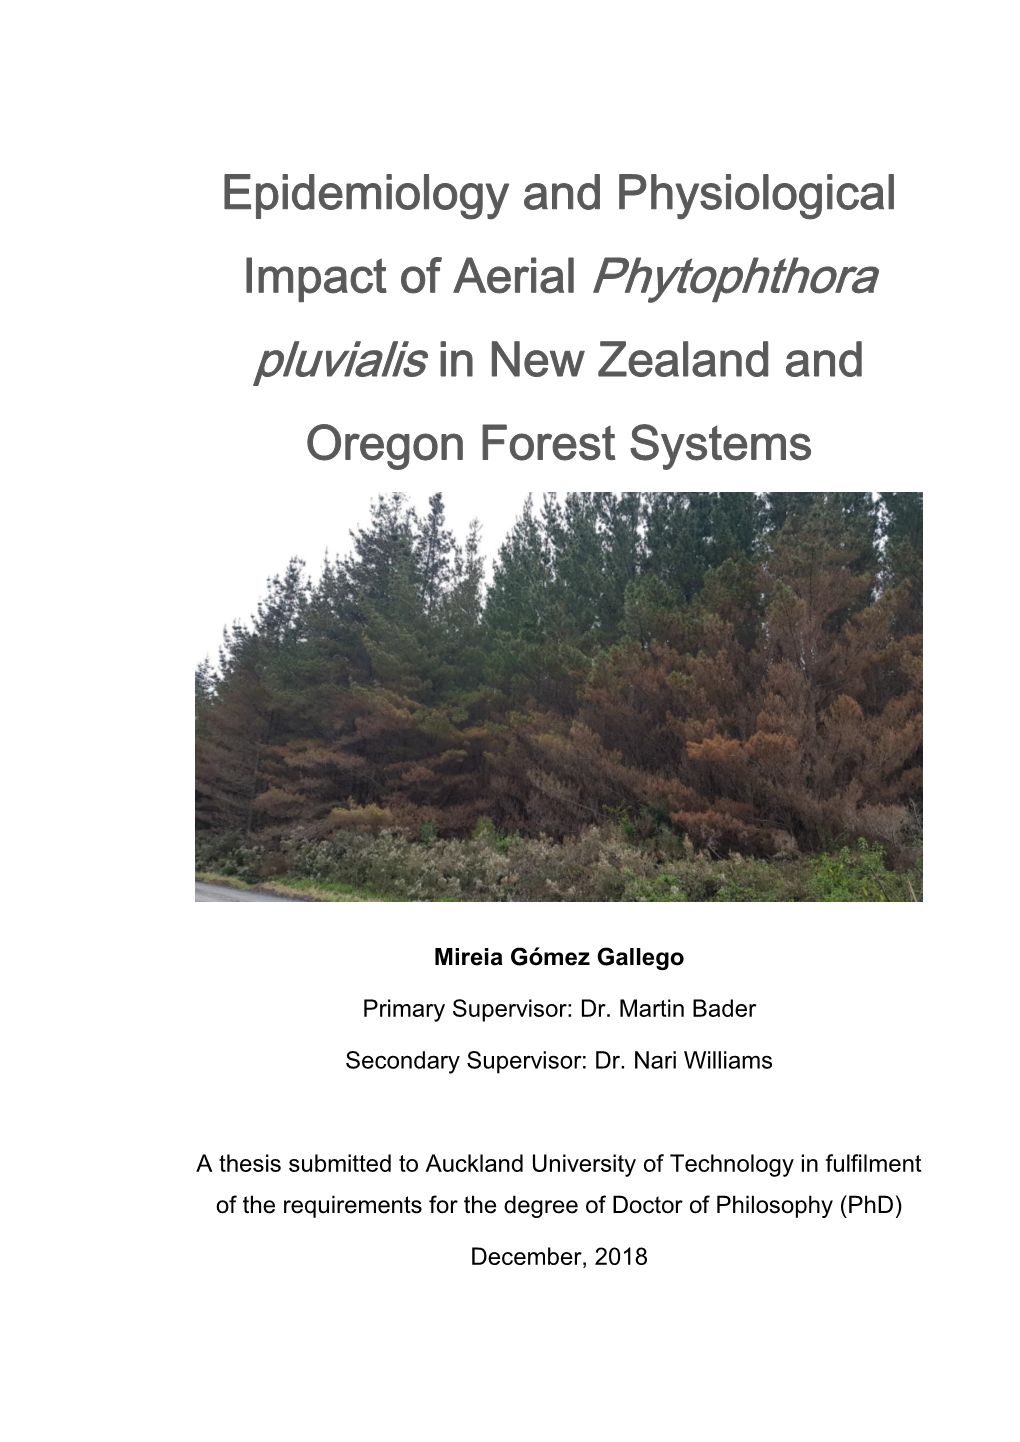 Epidemiology and Physiological Impact of Aerial Phytophthora Pluvialis in New Zealand and Oregon Forest Systems